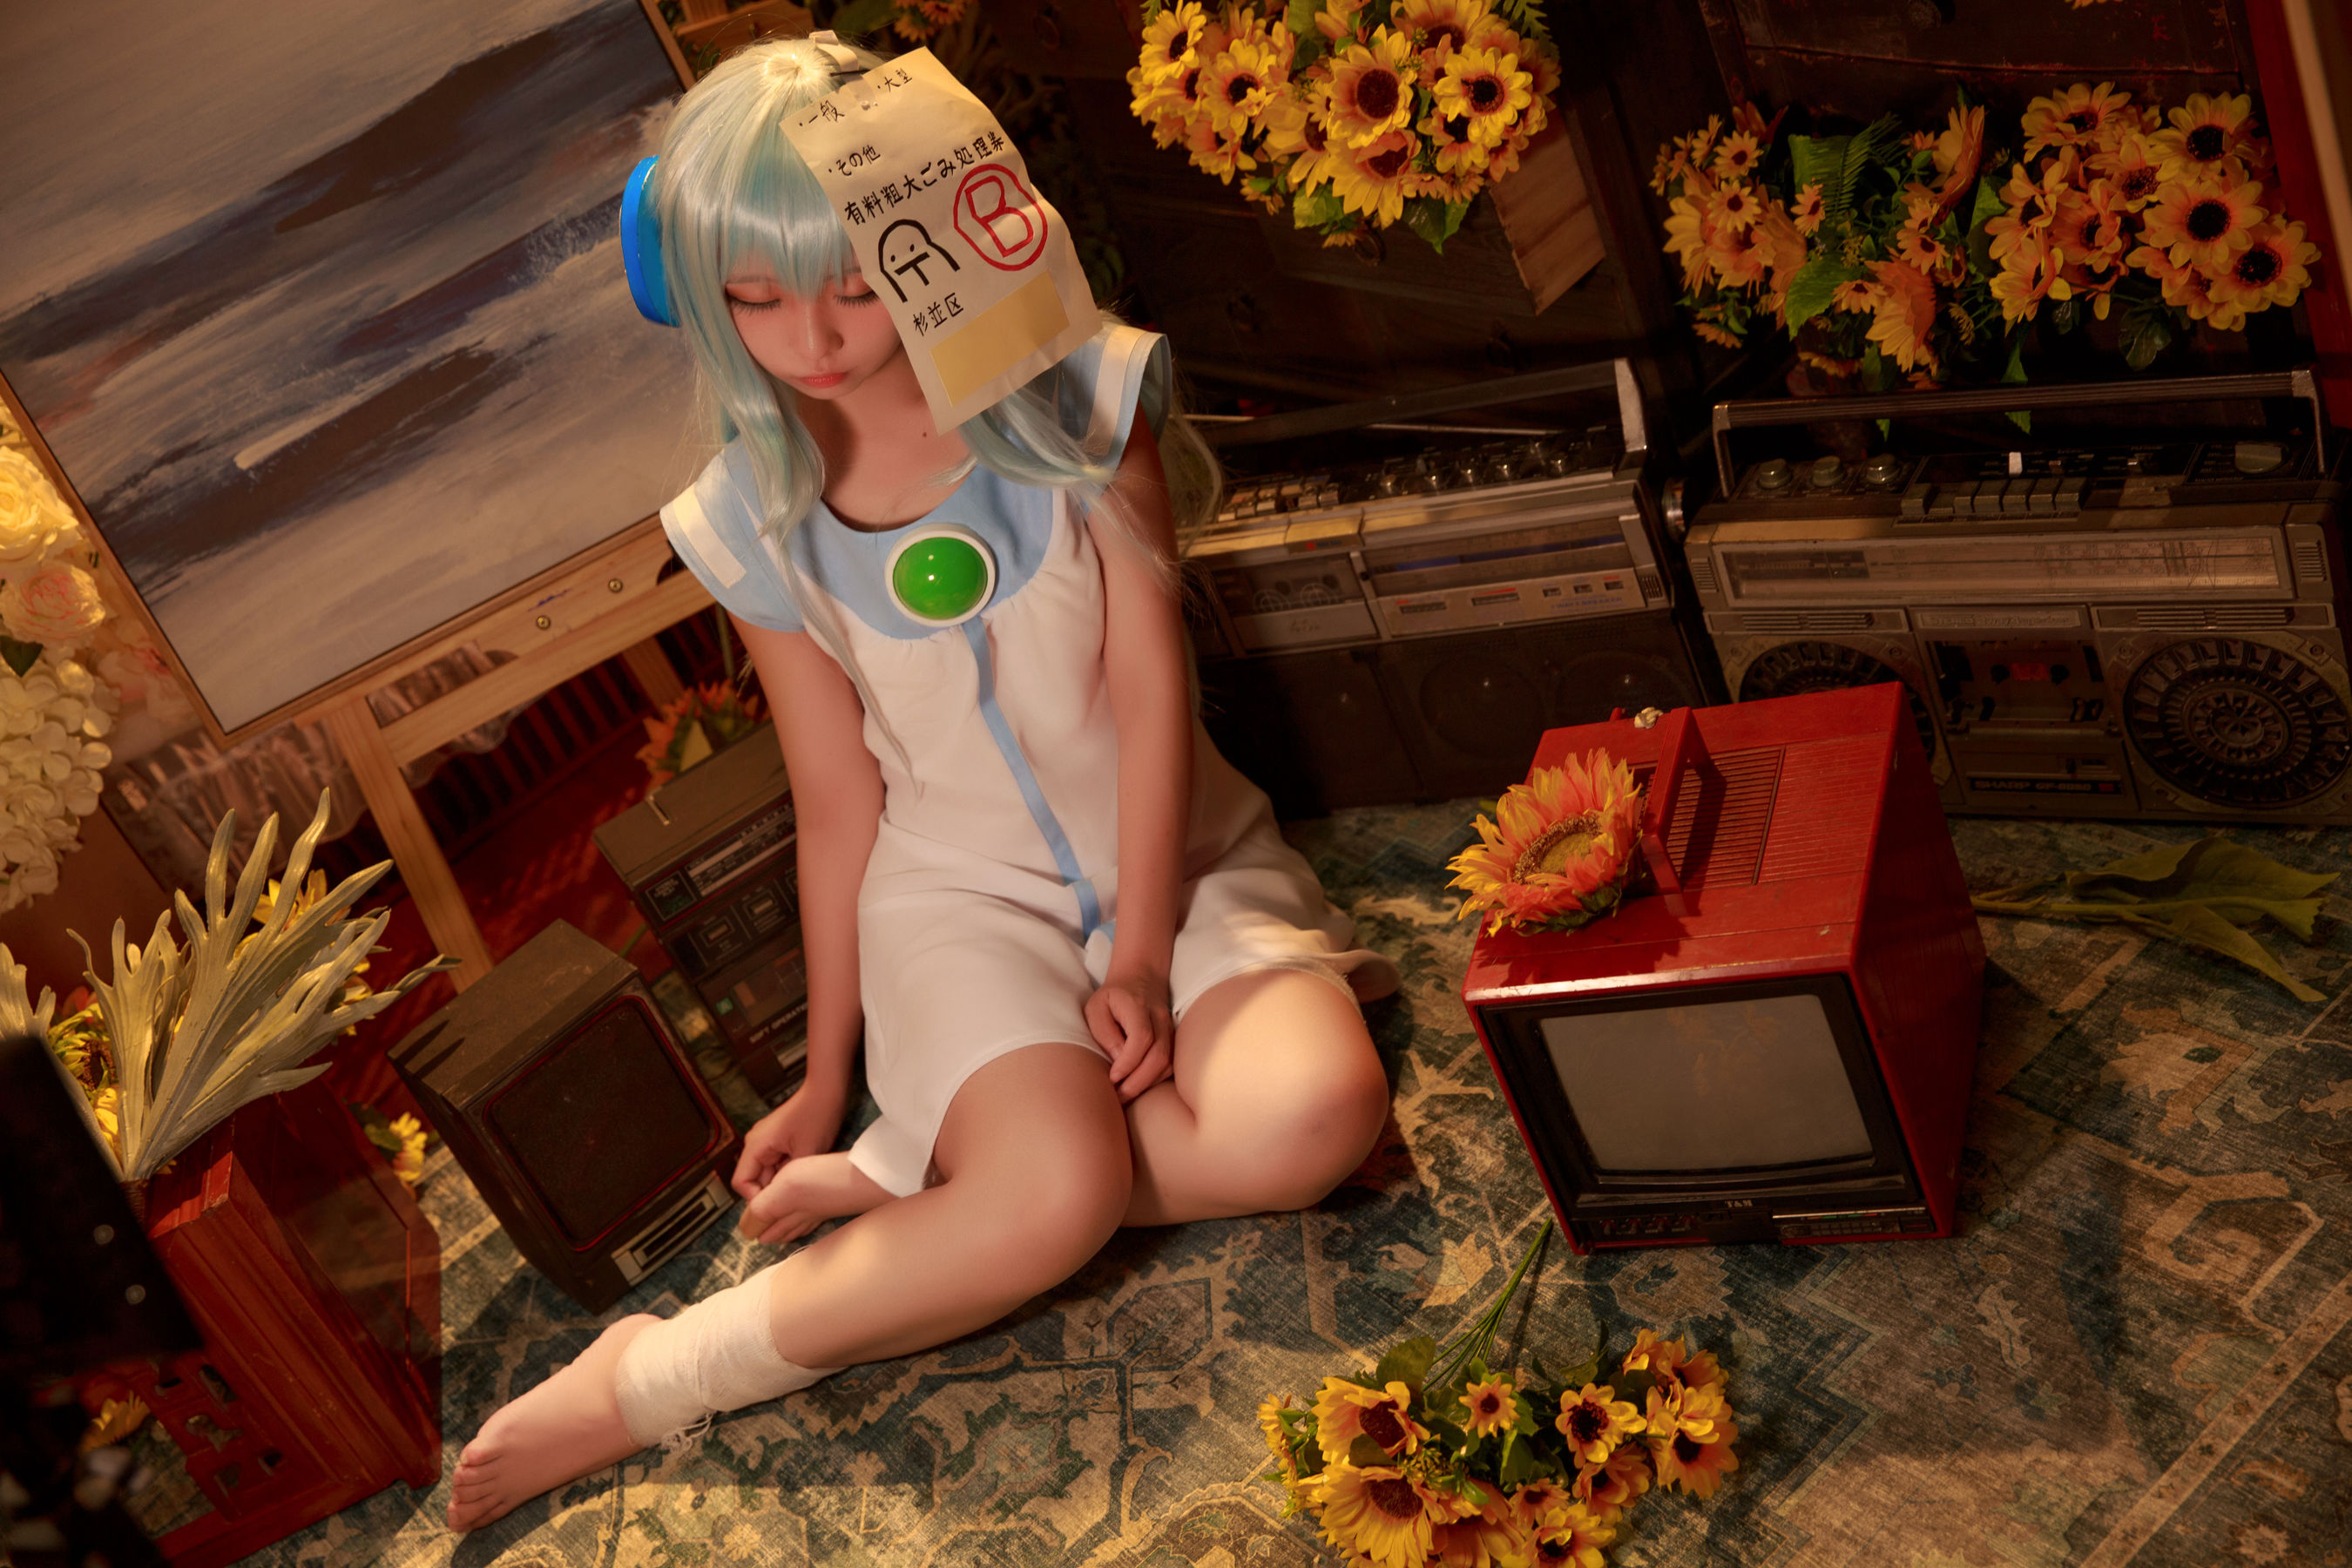 [Net Red COSER Photo] Anime blogger G44 will not be hurt - Music Box Page 3 No.c65e38